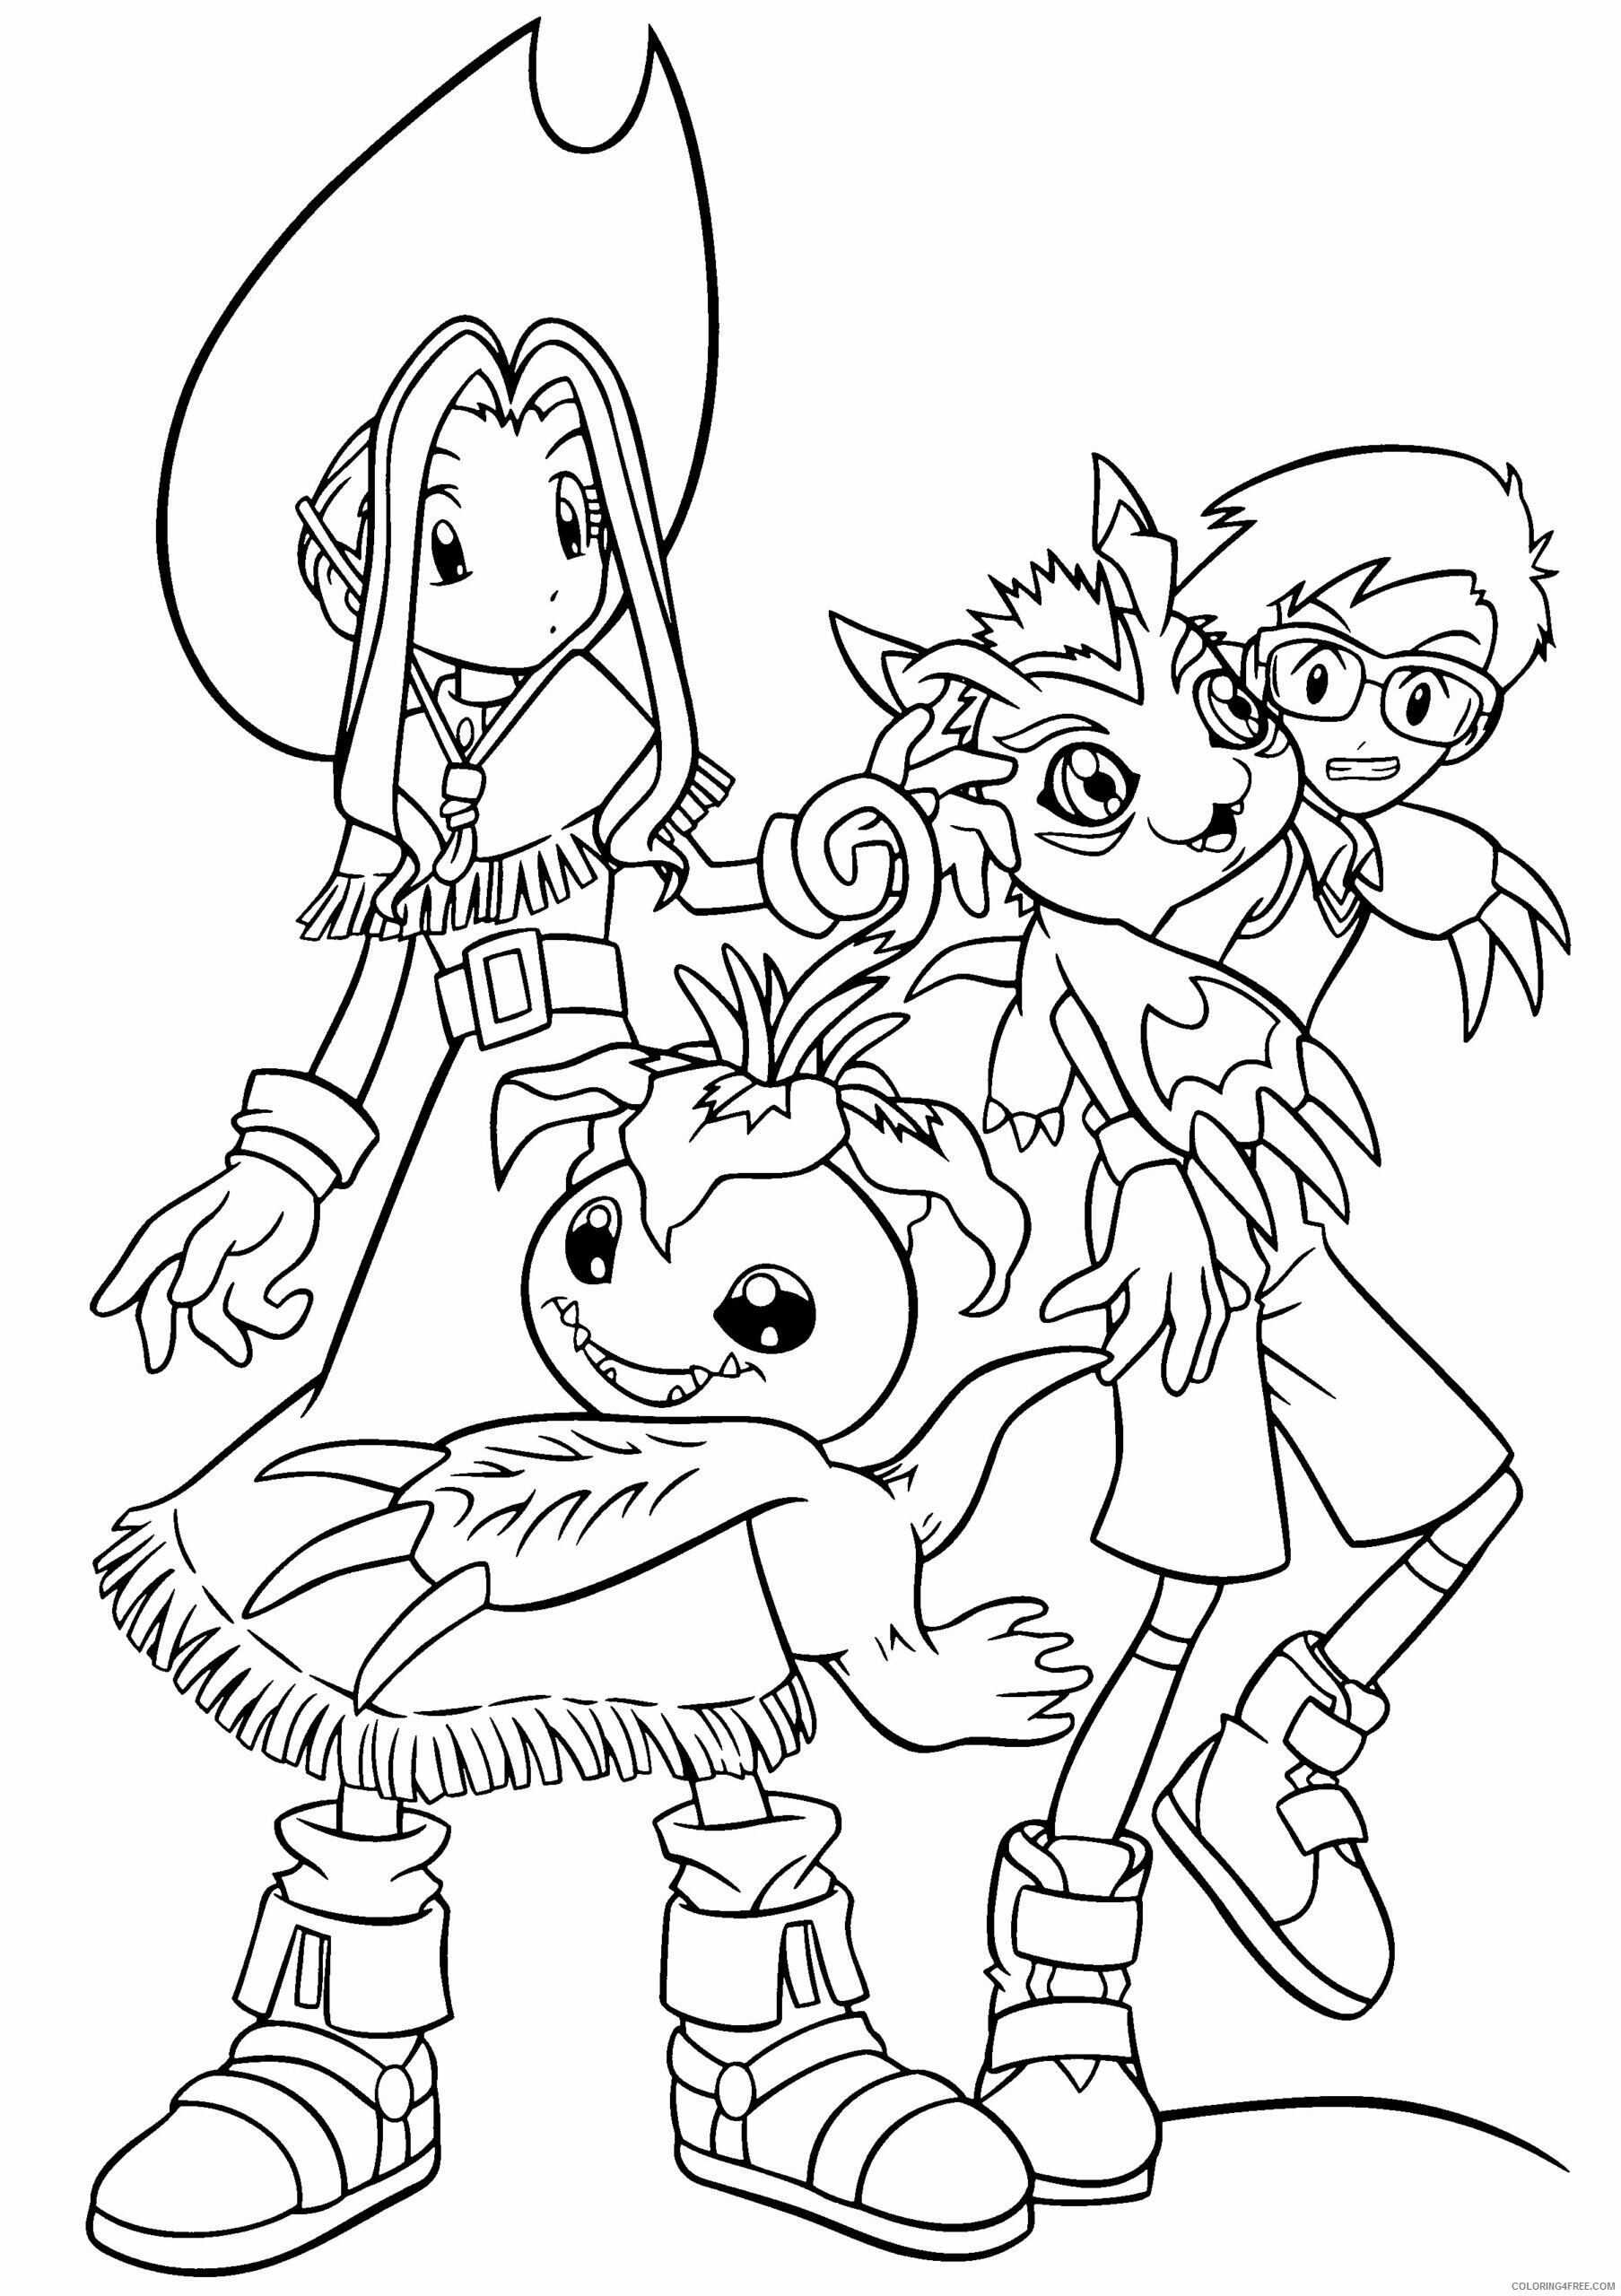 Digimon Printable Coloring Pages Anime Printable Digimon For Kids 2021 0408 Coloring4free